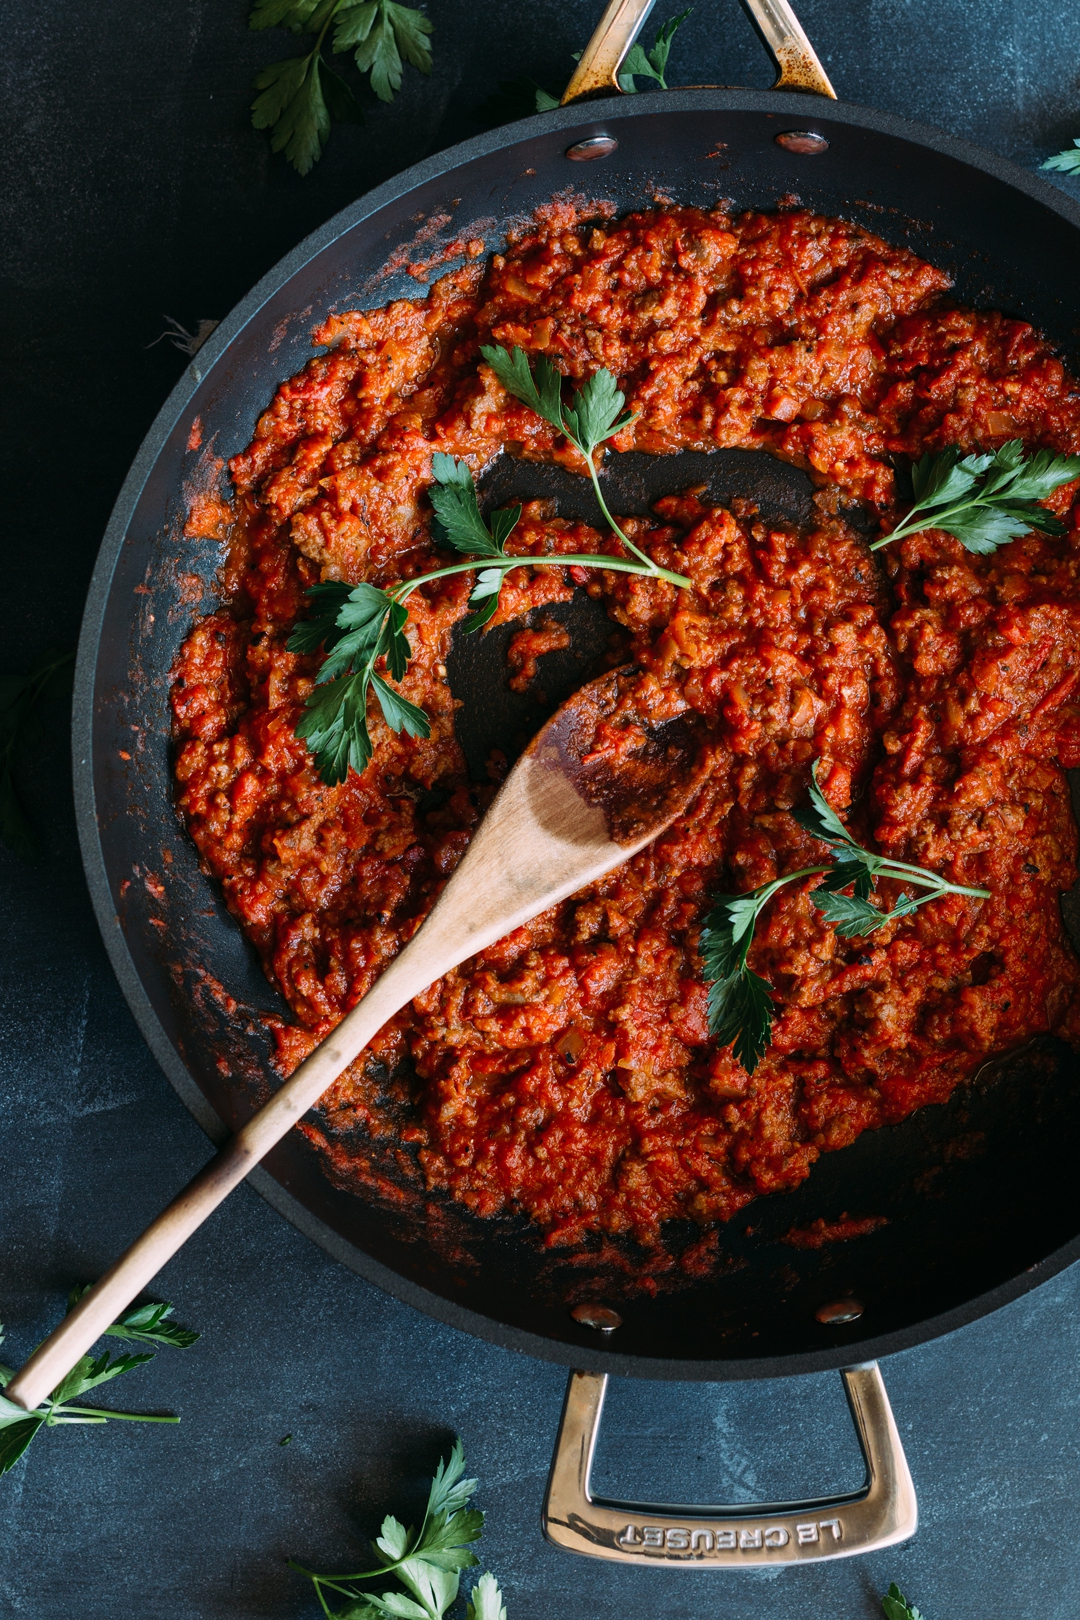 This Easy Homemade Marinara uses fire-roasted diced tomatoes, Vietnamese caramel sauce, and a sardine to get fast and easy flavor packed full of umami. #marinarasauce #homemadesauce #easy #pasta #tomatosauce | www.megiswell.com